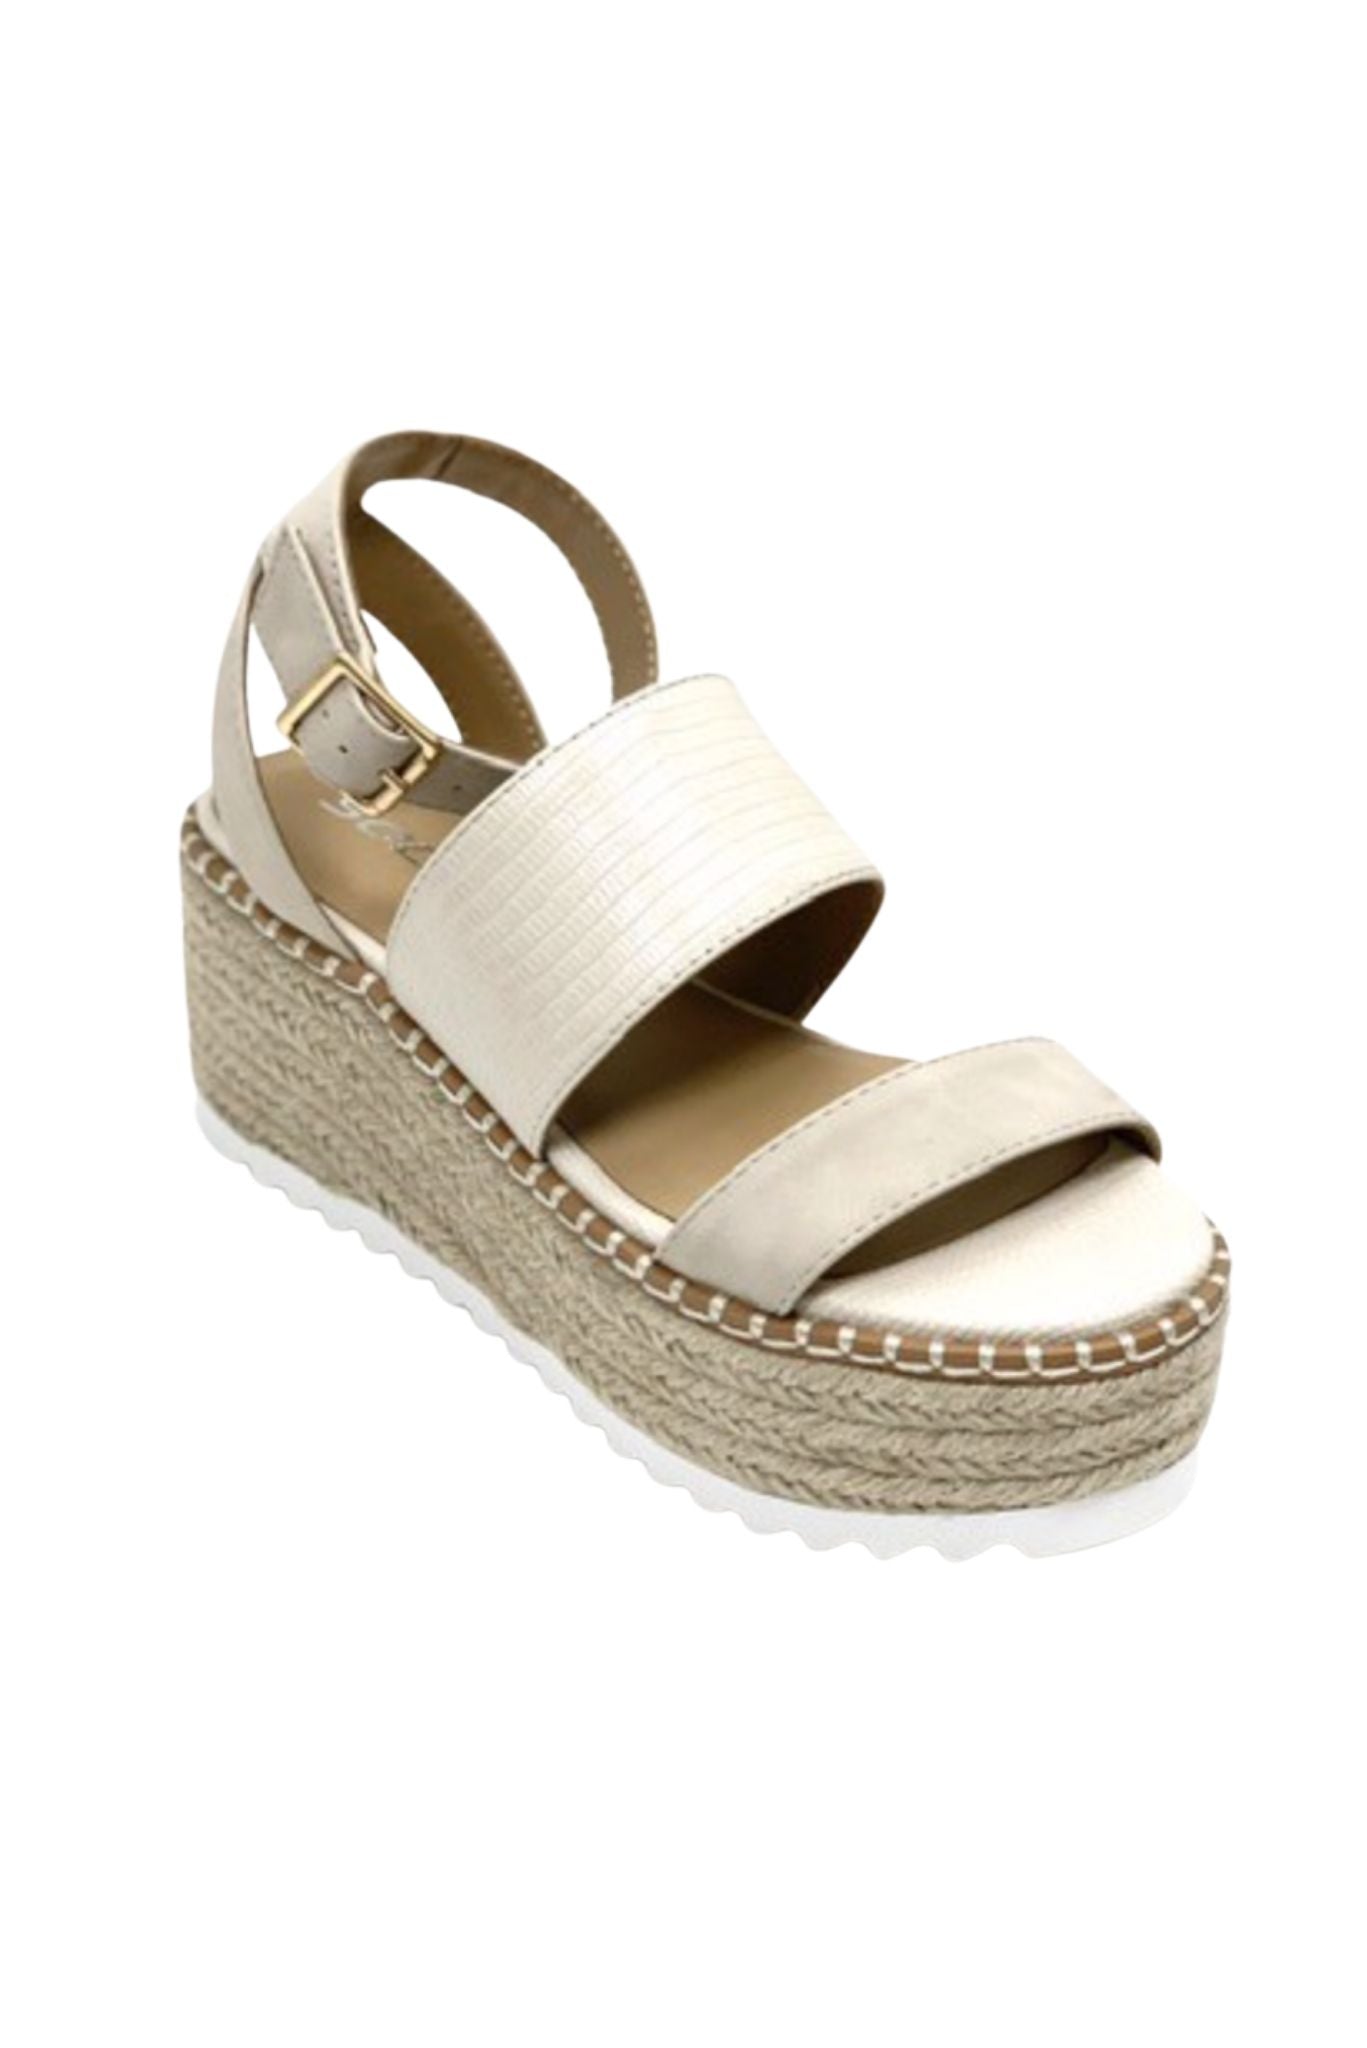 Load image into Gallery viewer, neutral espadrille platform wedges, spring shoes, chloe dupes, alligator wedges, affordable fashion, shop style your senses by mallory fitzsimmons
